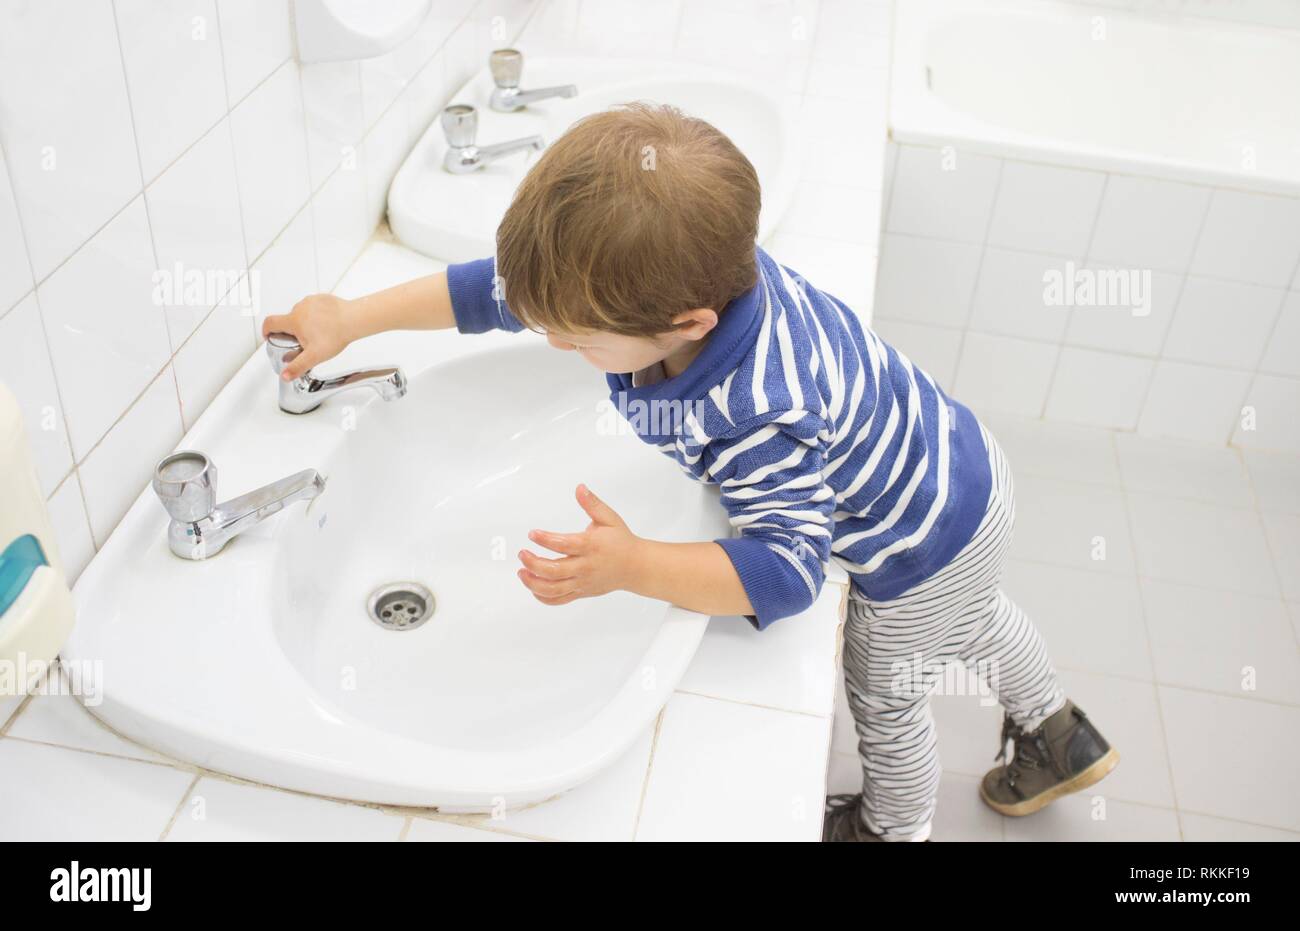 3 years boy washing hands at adapted school sink. Learning hygiene habits. Stock Photo